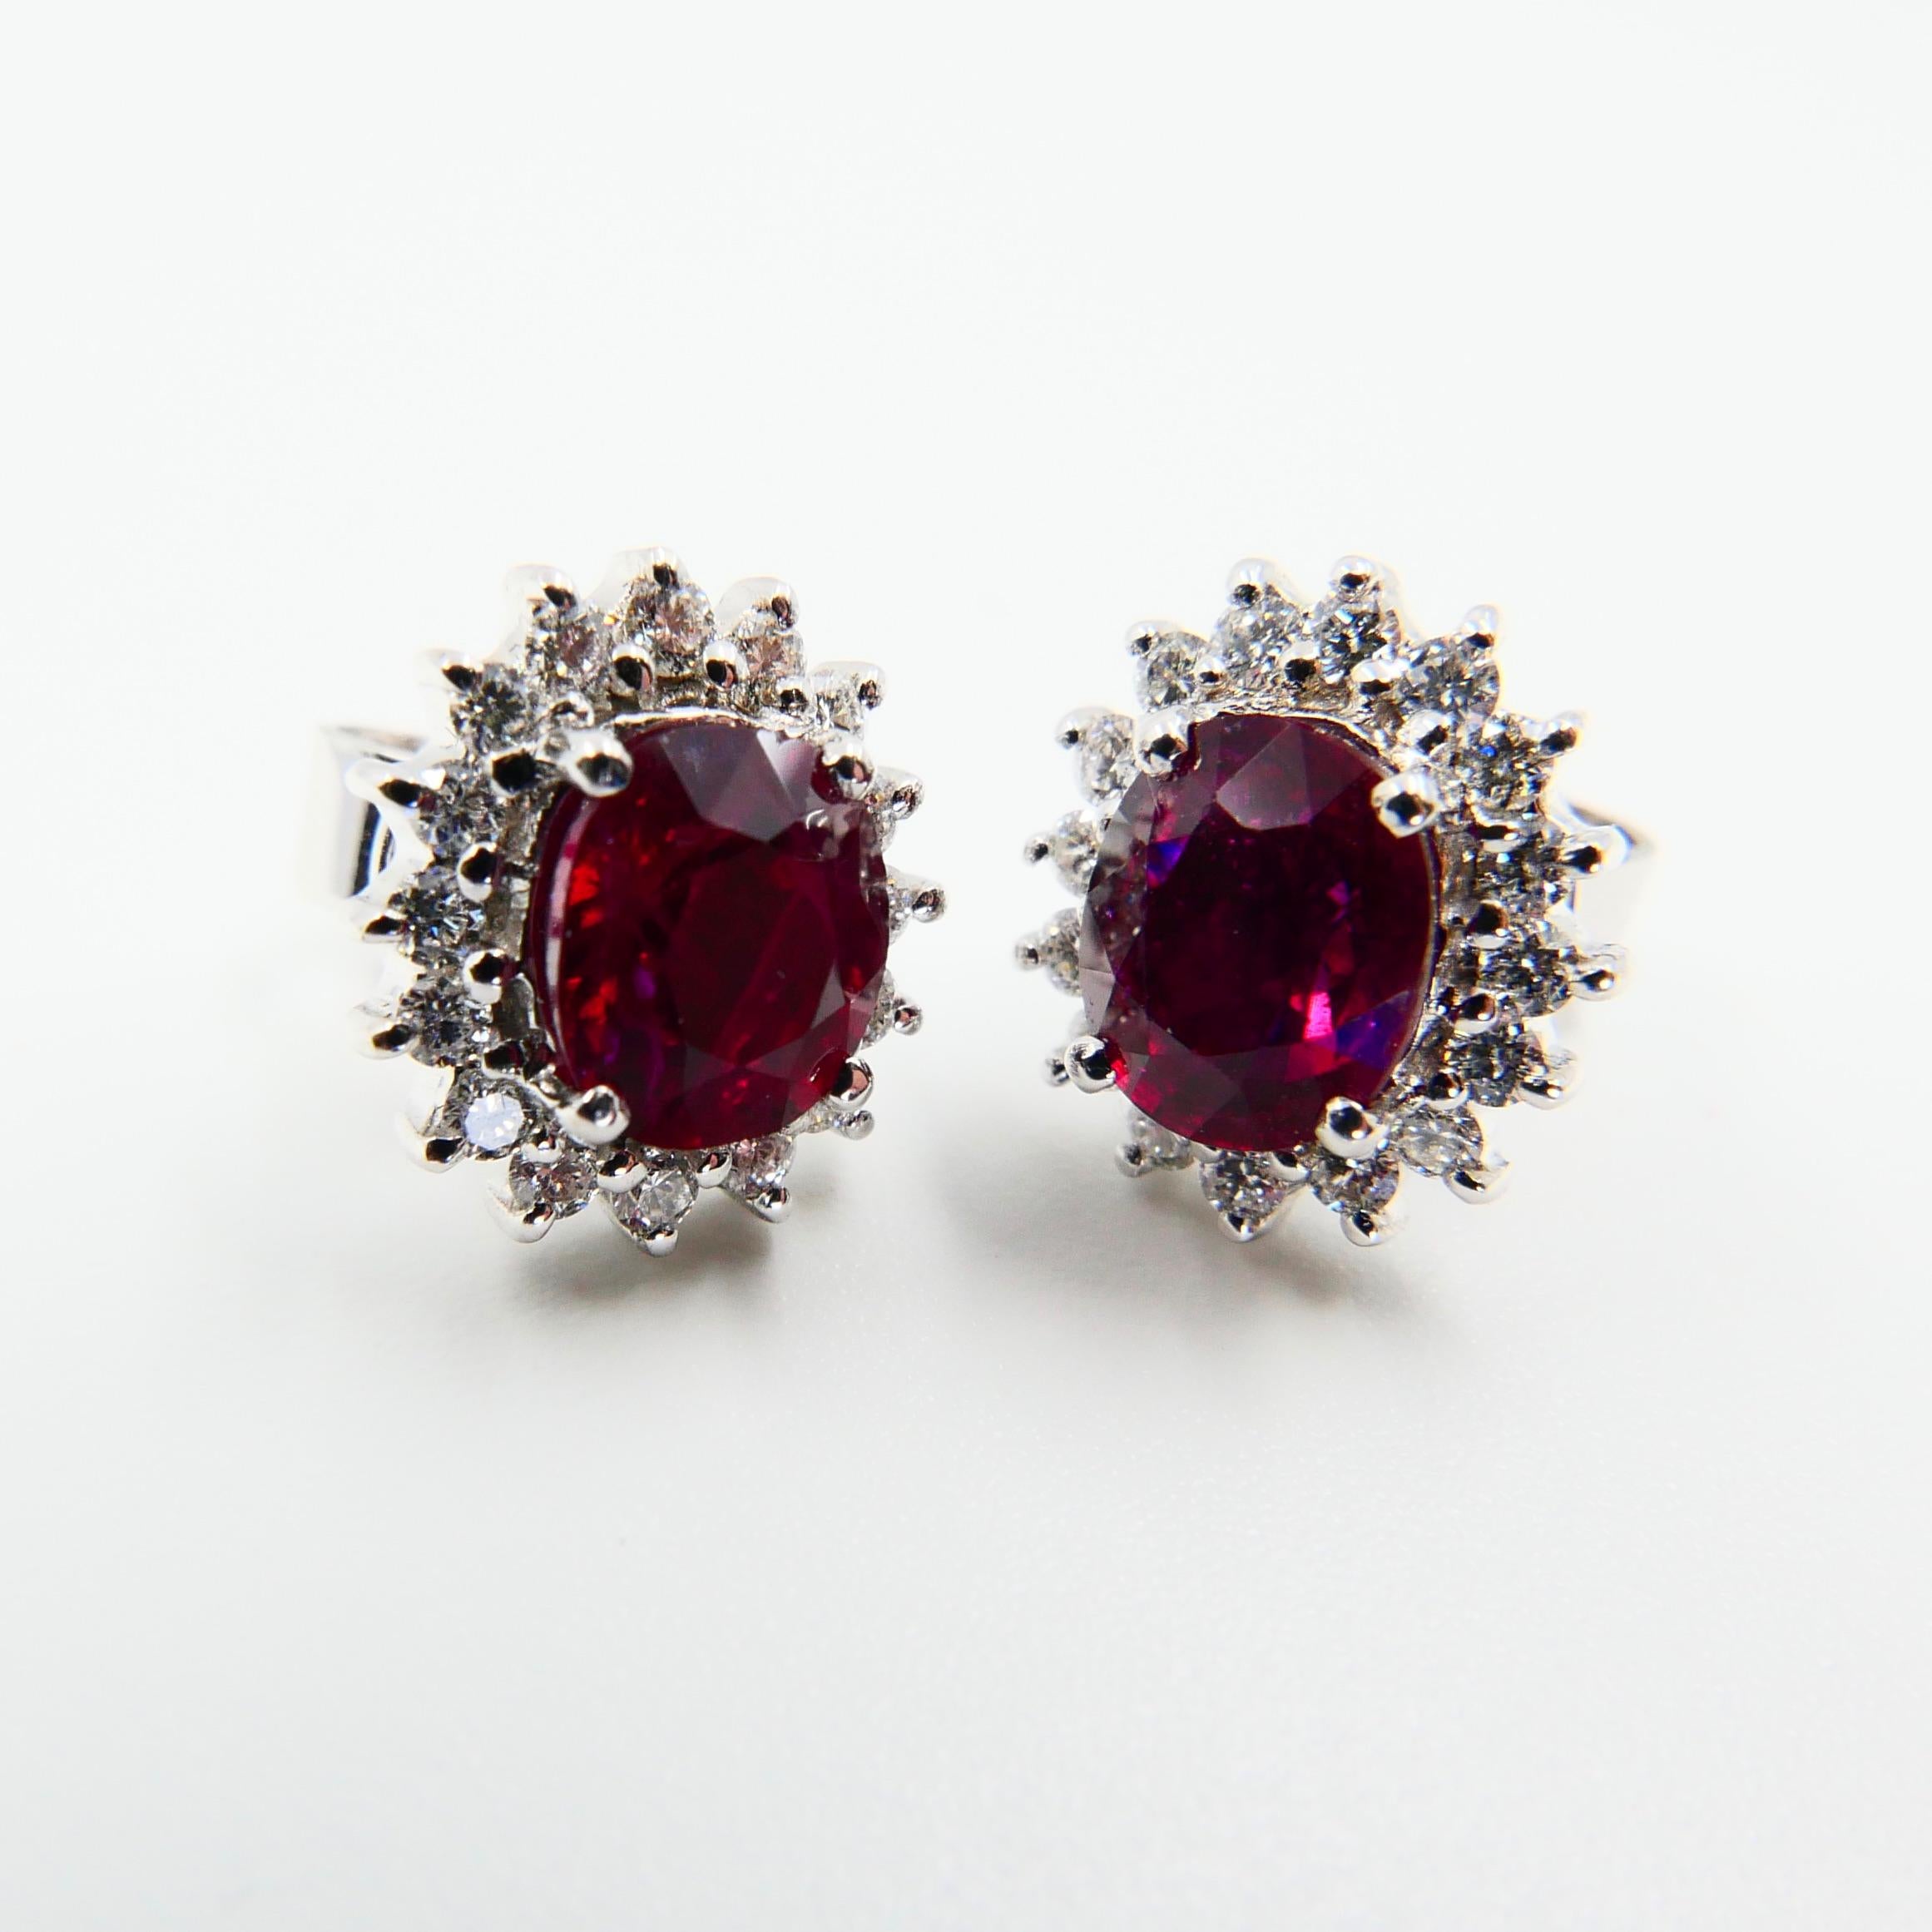 Vivid Red Ruby 2.09 Carat and Diamond Stud Earrings, Close to Pigeon Blood Red 4